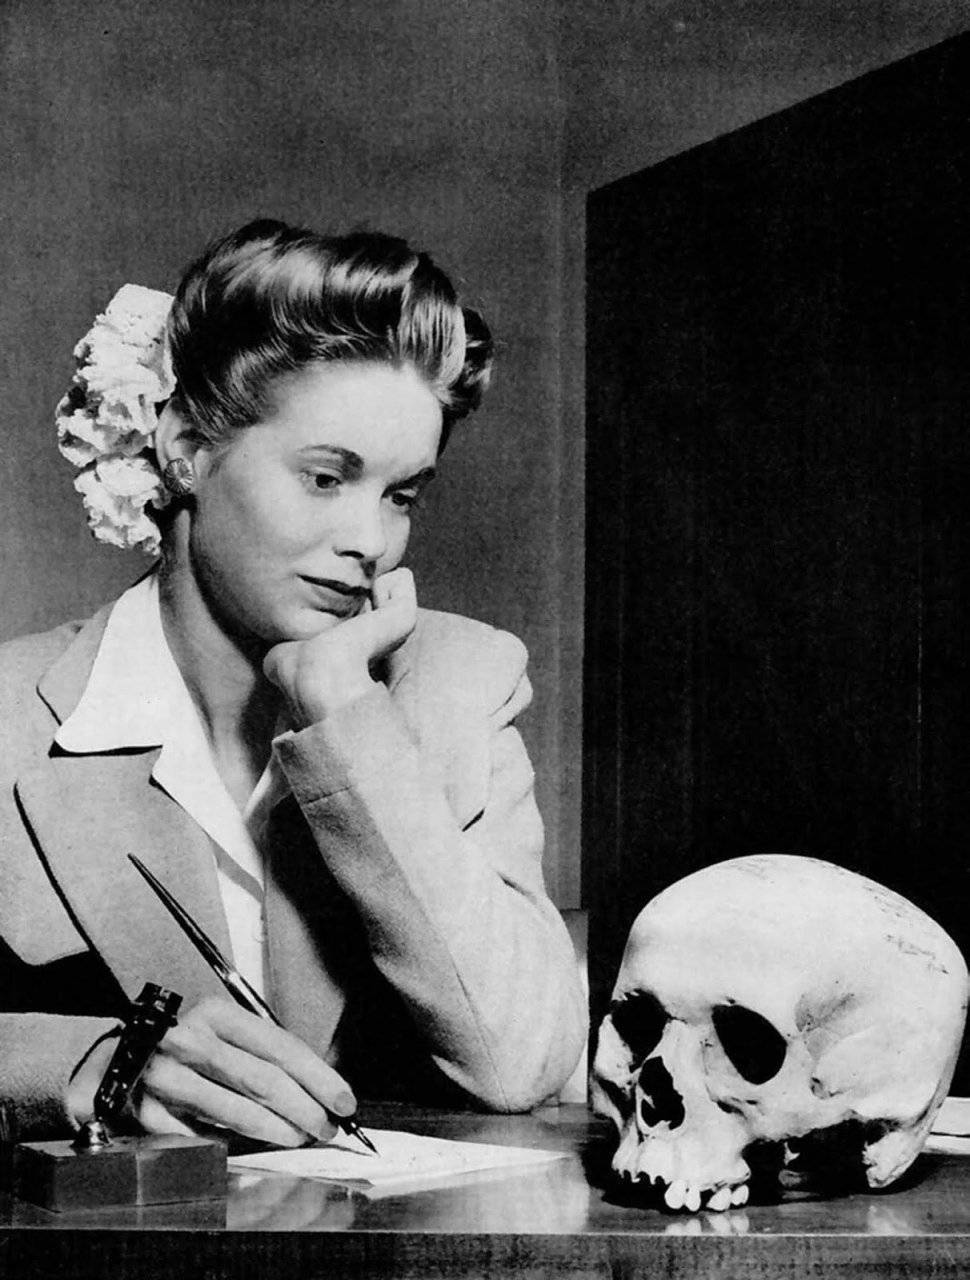 A woman writing a thank you note to her boyfriend in the Navy for the skull of a Japanese soldier that he sent her, 1944.